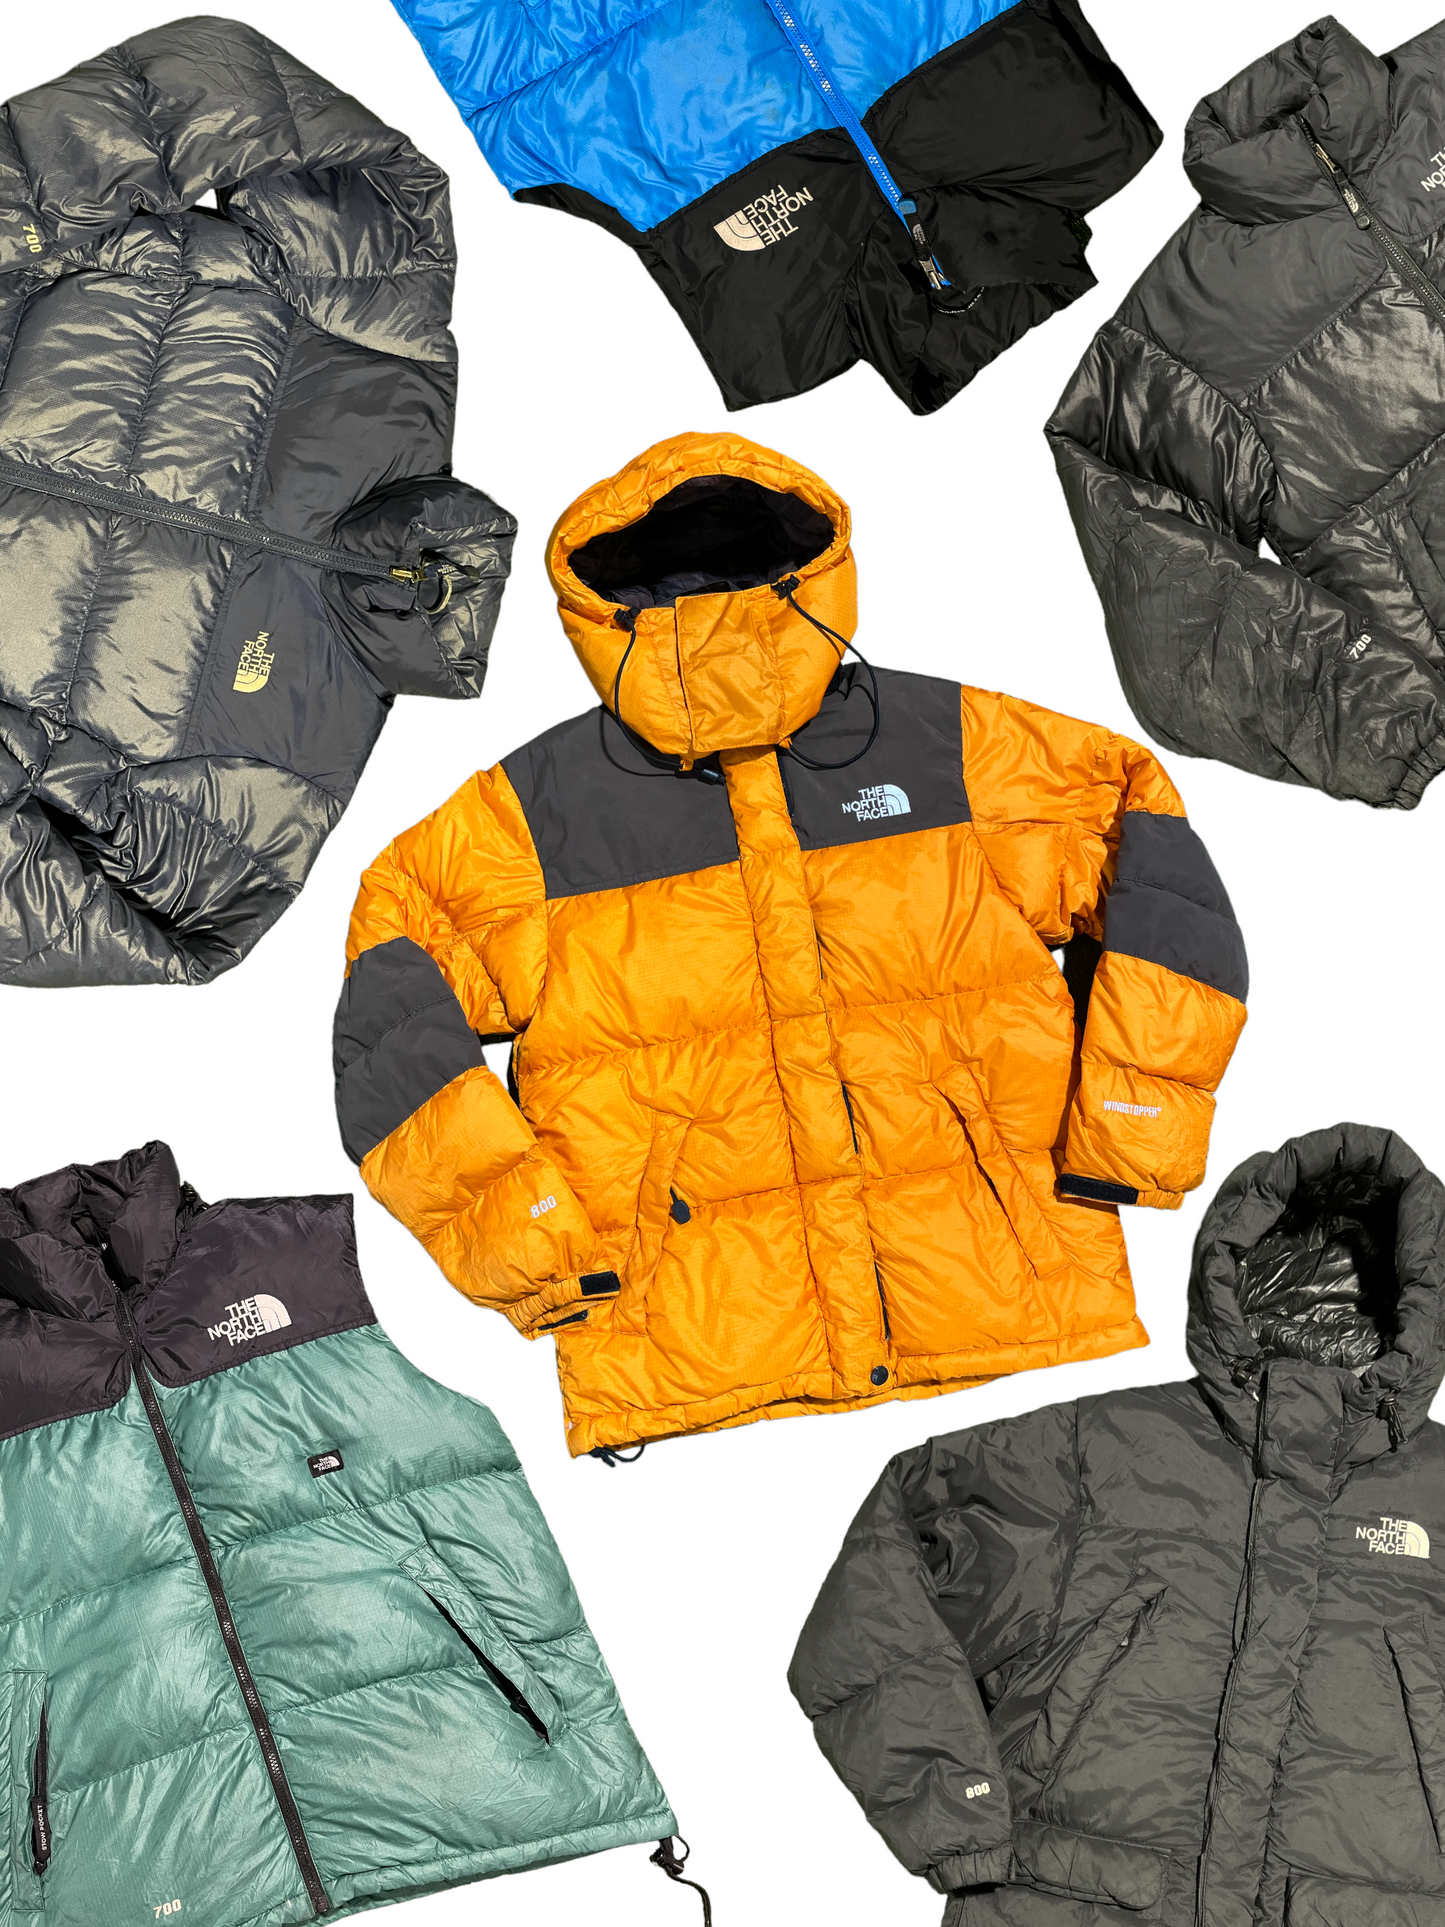 THE NORTH FACE 700/800/900 - BALE